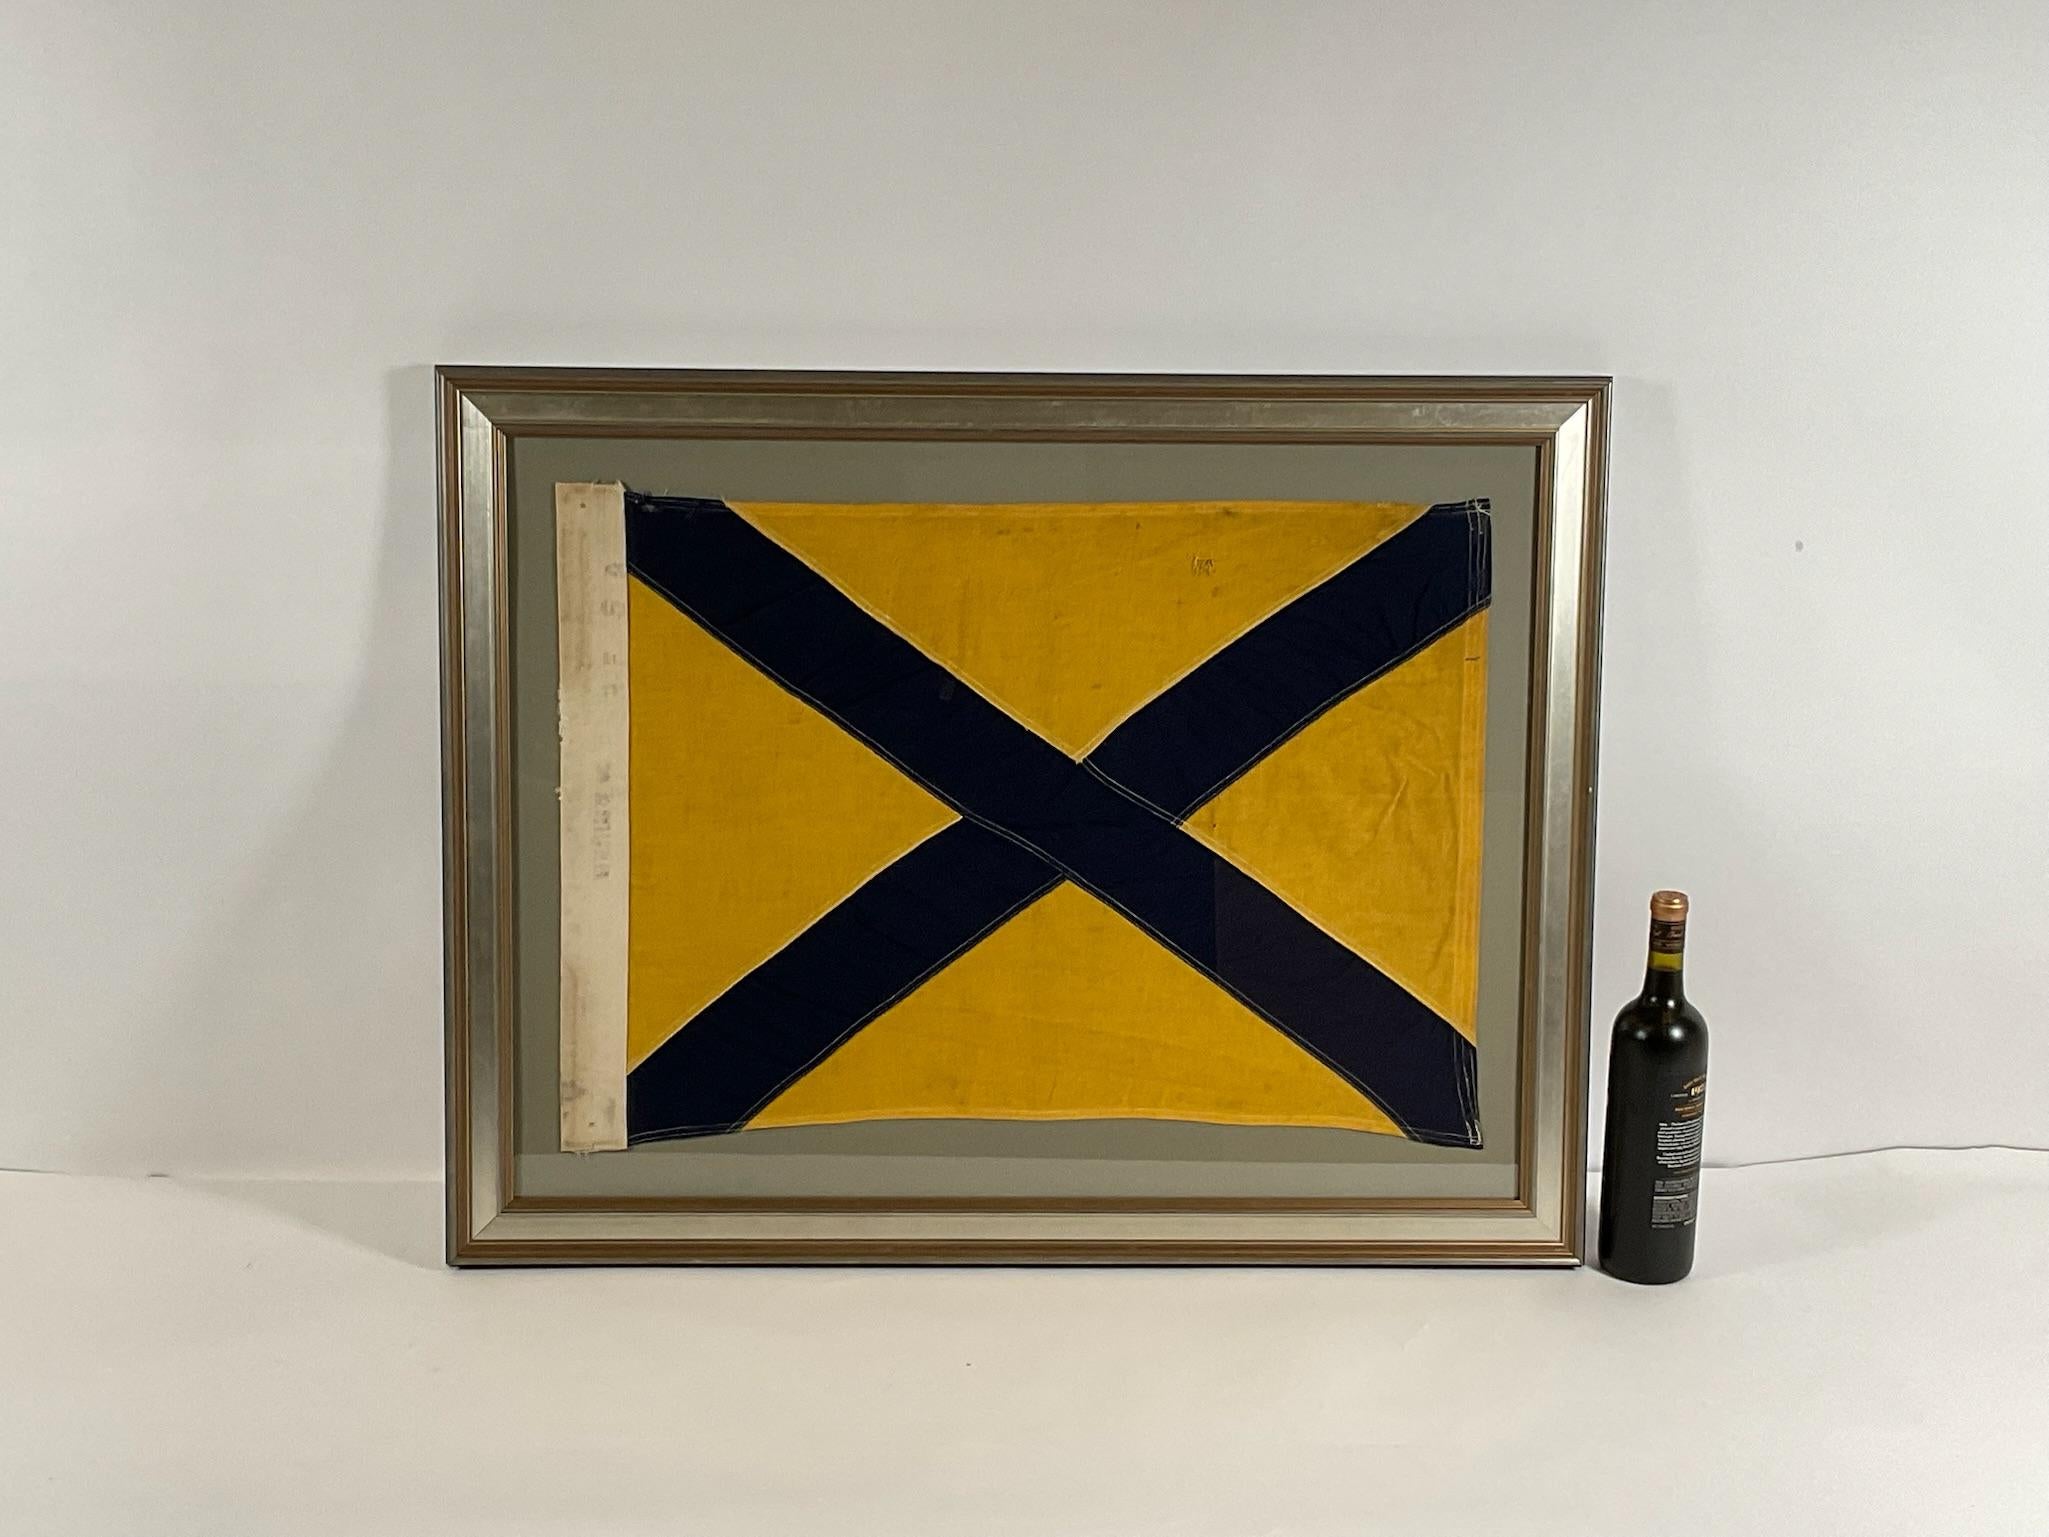 Linen maritime flag with sturdy canvas hoist and stitched panels of yellow and blue. The hoist is stamped Dettra Flag Company Incorporated. This is a US Navy signal for number FIVE, signal code 